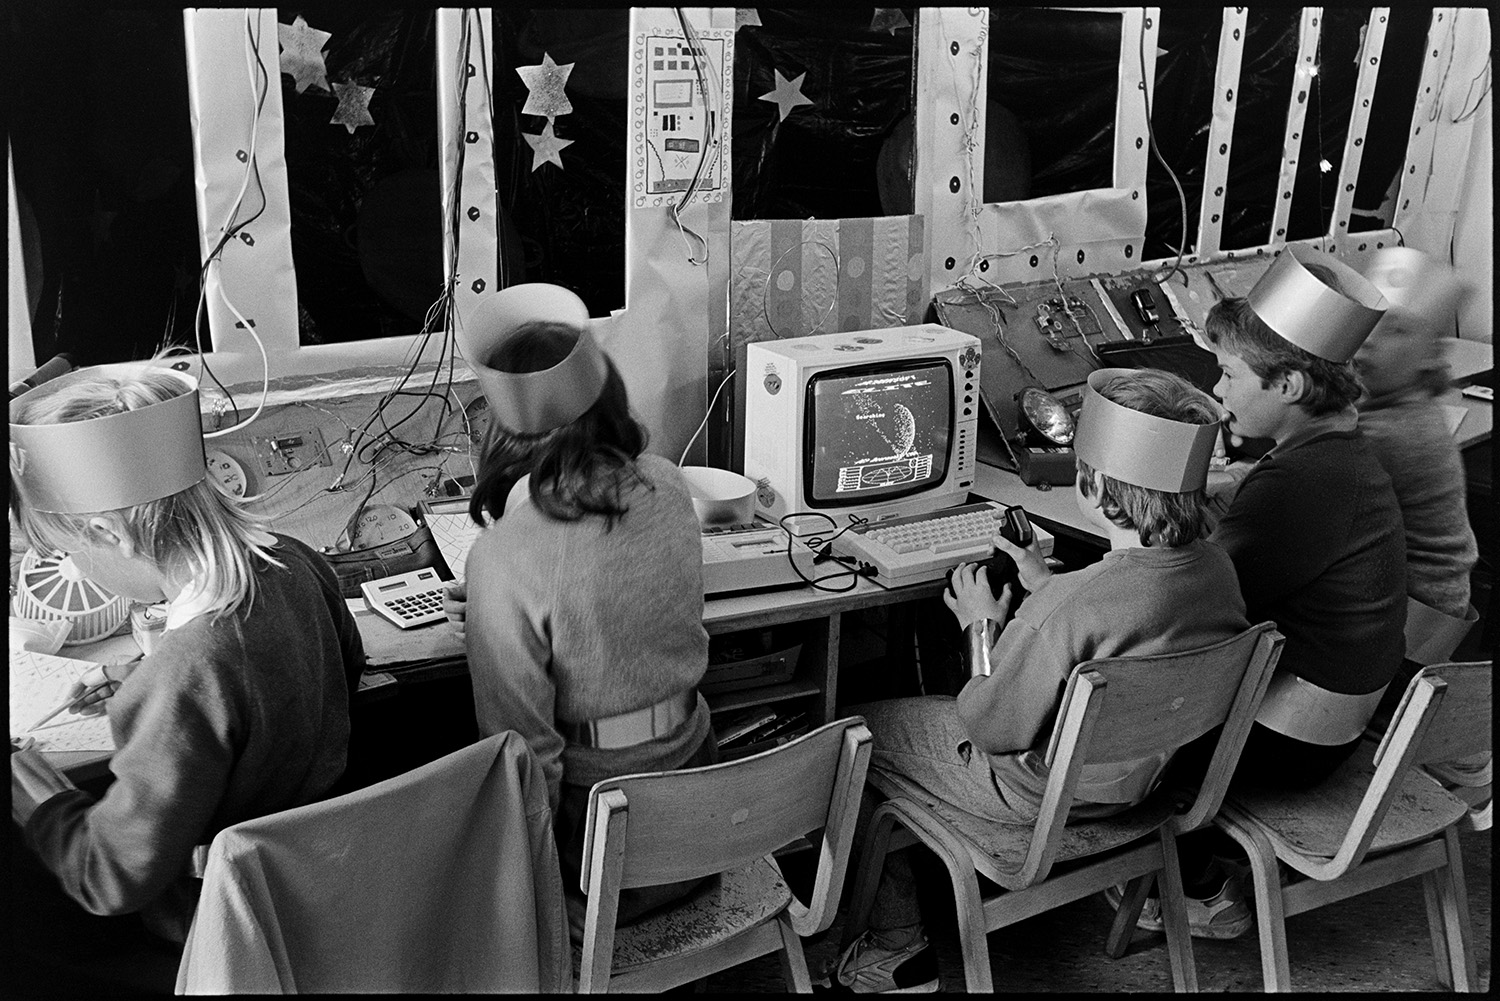 Schoolchildren working on space project pretending to be astronauts. 
[Boys and girls working on drawings for a space project in a classroom at Bideford Primary School. Two of the pupils are playing on a space themed computer game. They are all wearing hats.]